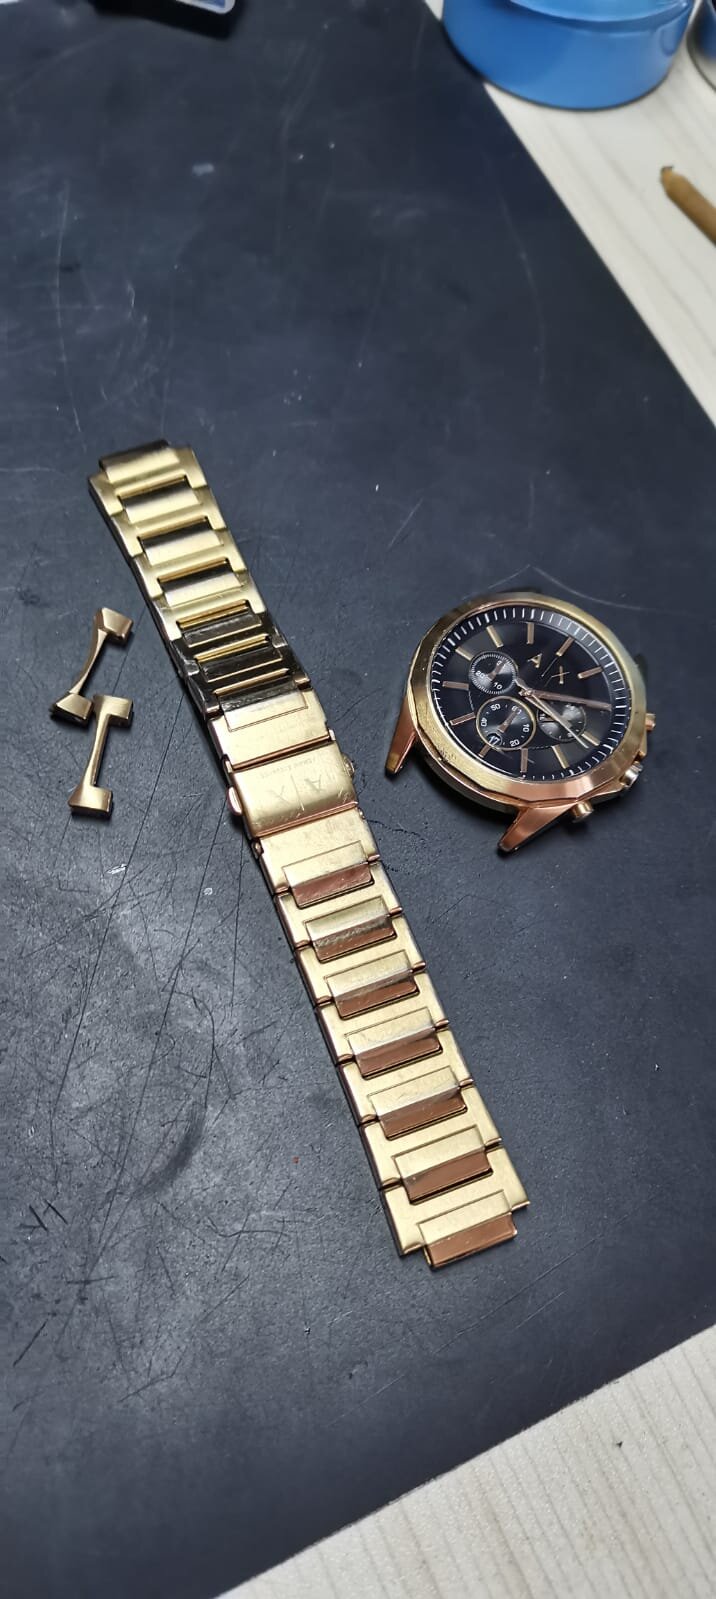 for | AX watch News Hub links repair 111811 Latest London. and North | Watch | Watch | Armani new clean Fixed Exchange glass Watches Repairs removal, Watch in battery, from AX2611